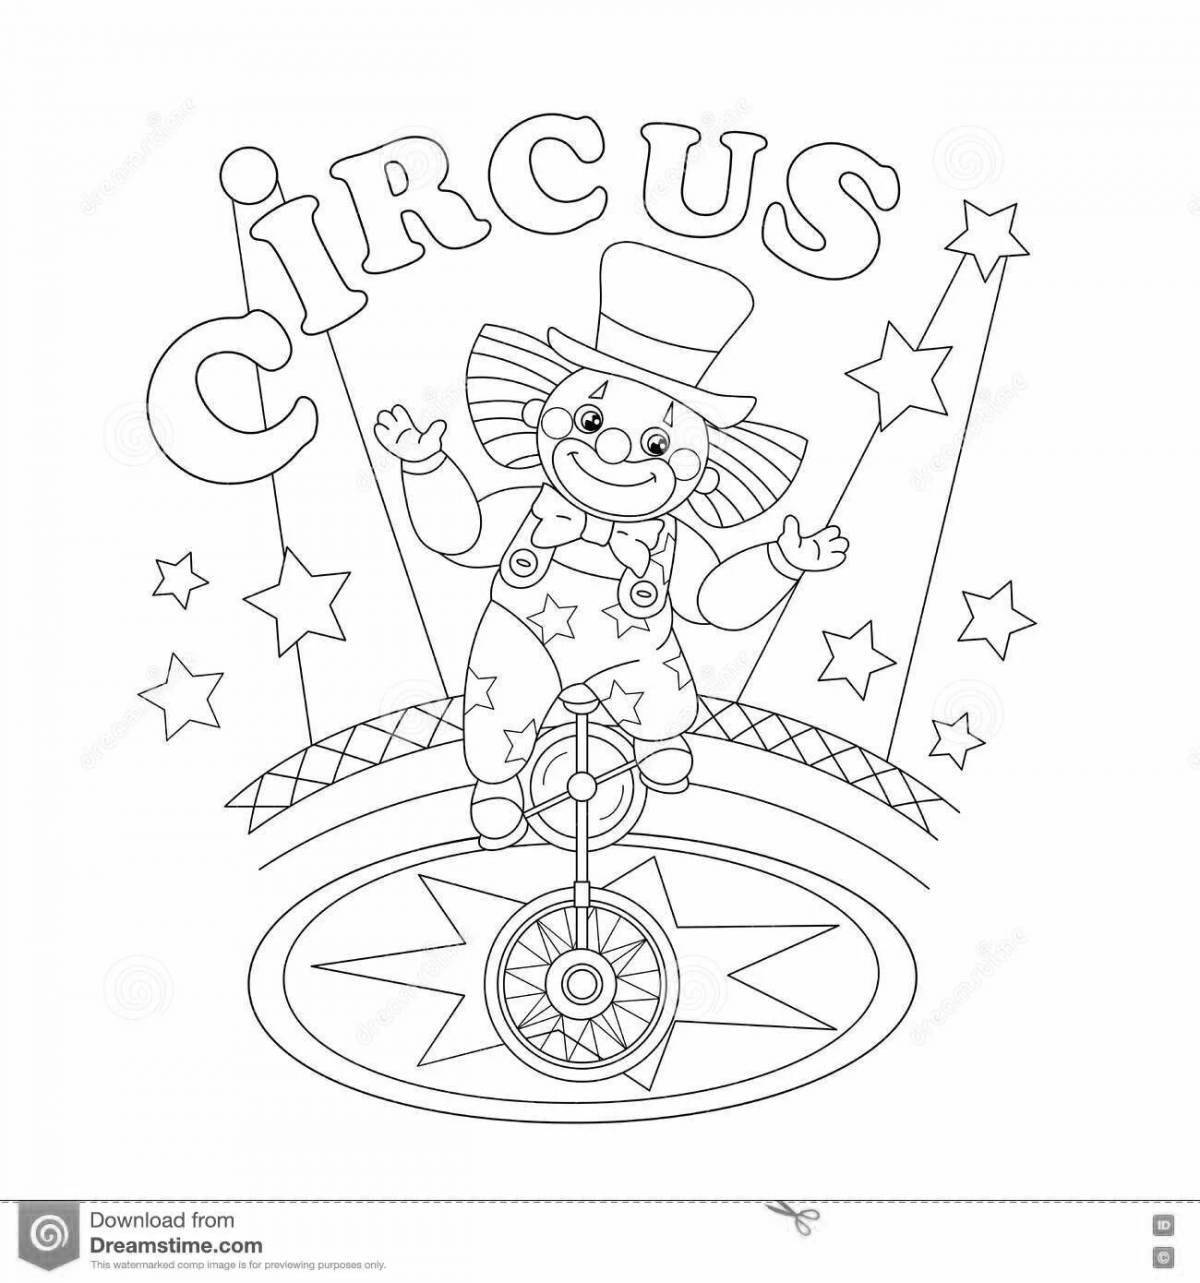 Coloring page wild circus performer